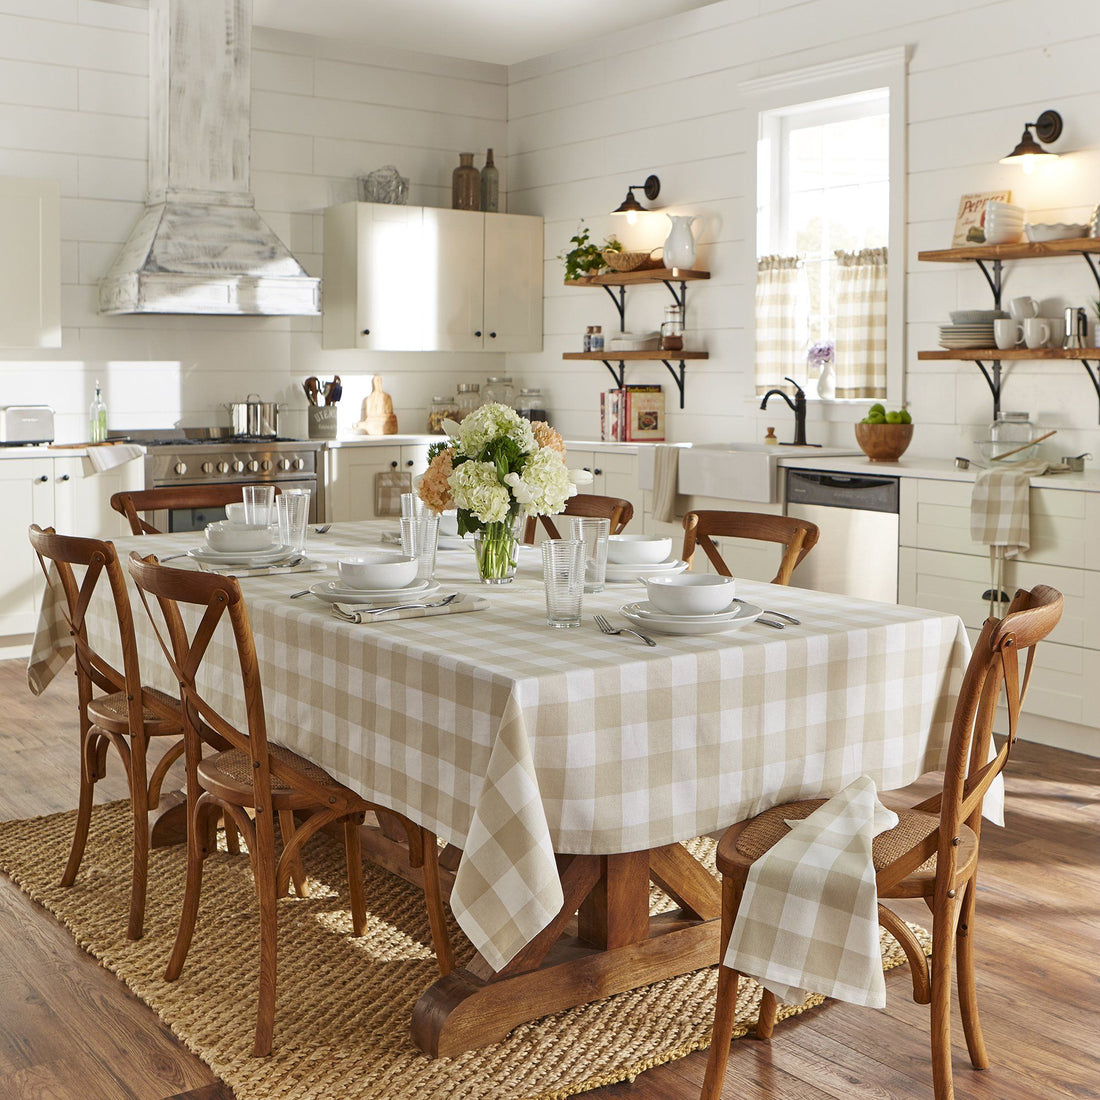 Farmhouse style kitchen with neutral buffalo check pattern tablecloth and accents